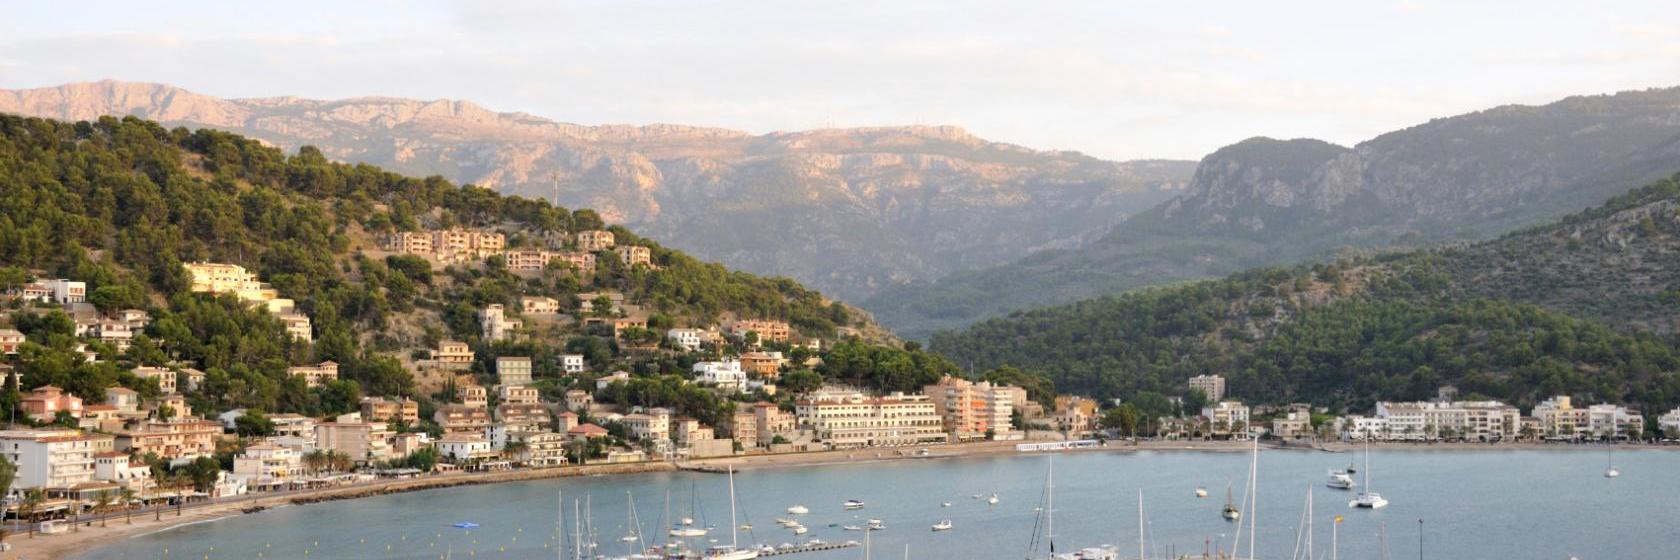 The 10 best hotels & places to stay in Port de Soller, Spain - Port de  Soller hotels